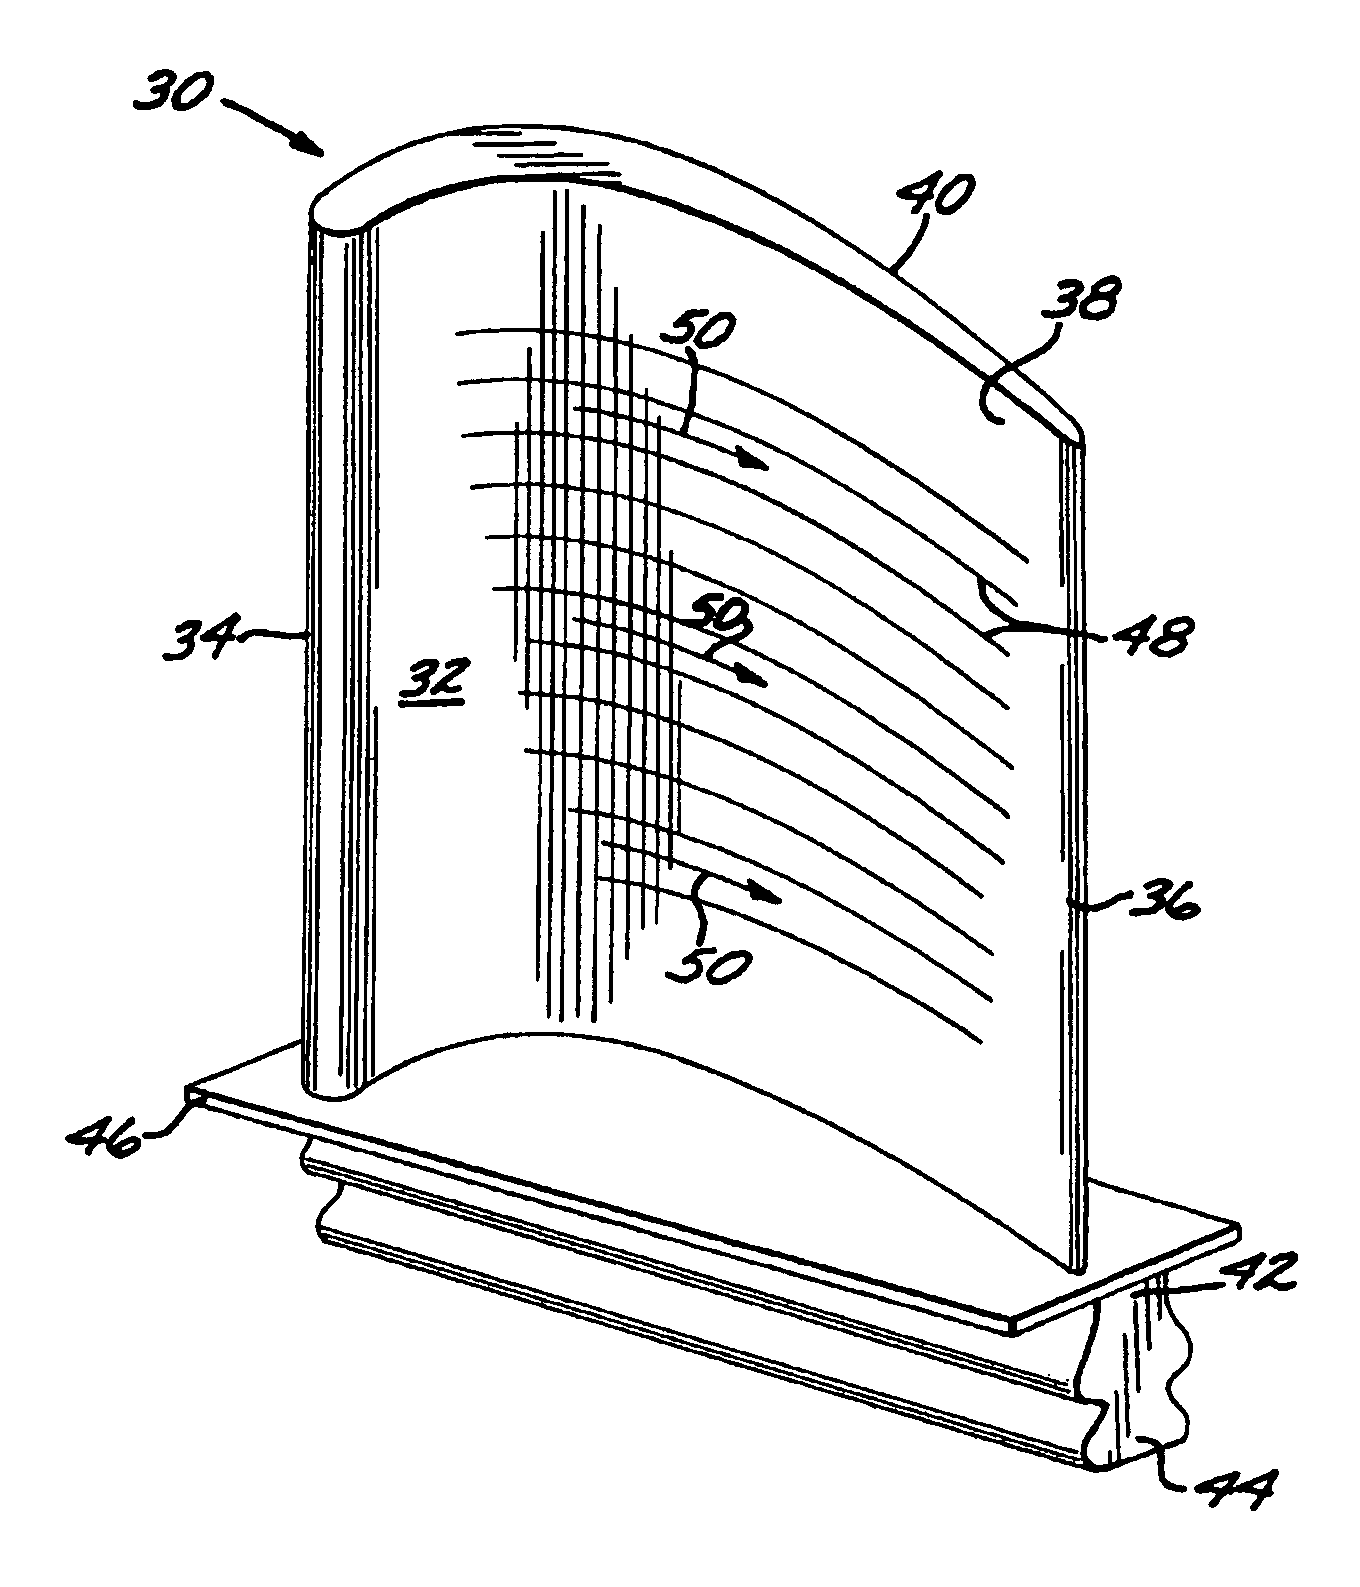 Preparation of an article surface having a surface compressive texture